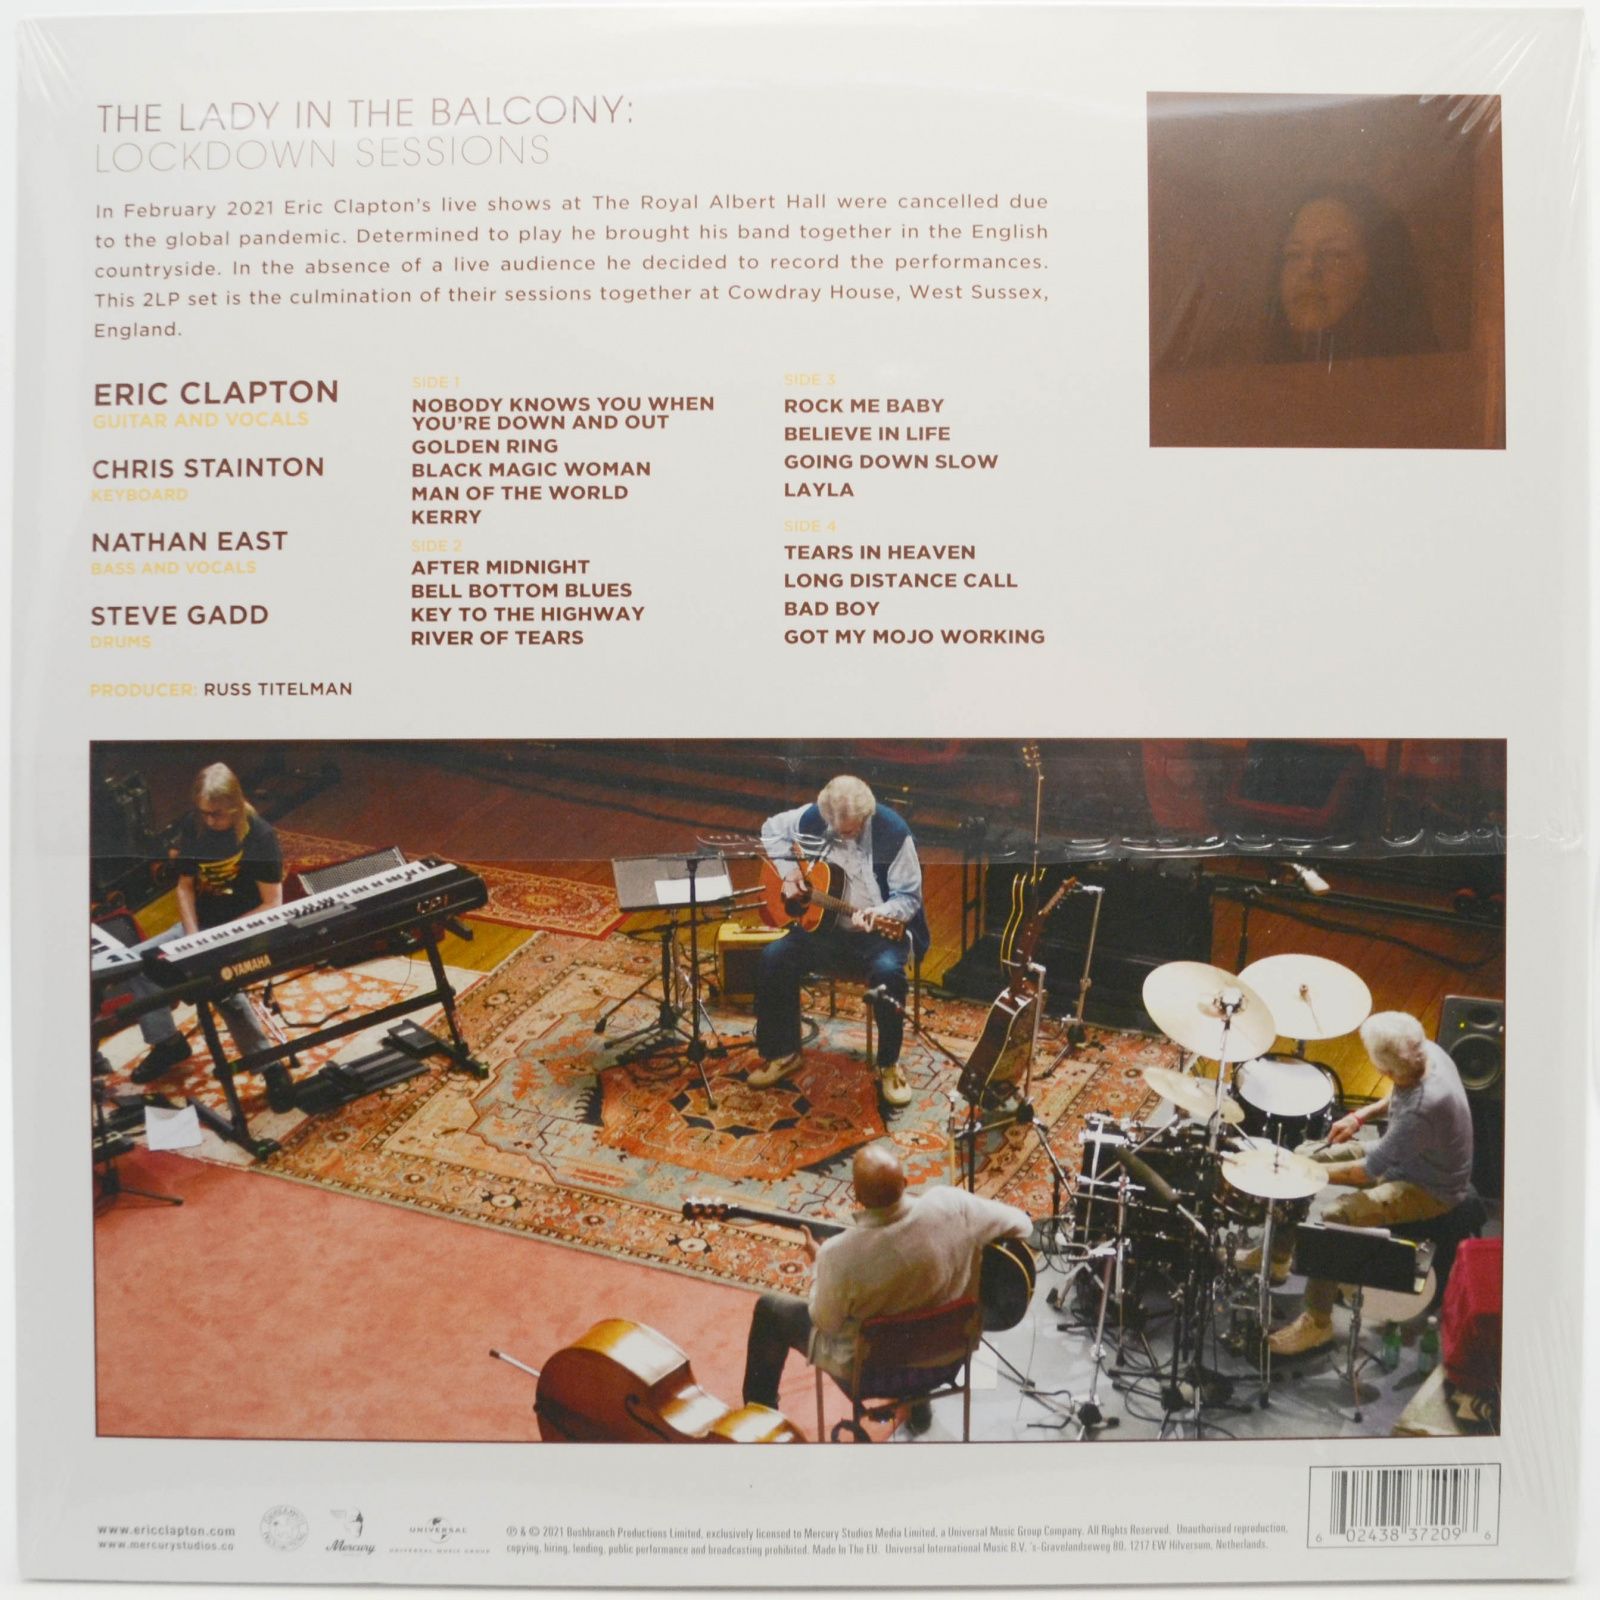 Eric Clapton — The Lady In The Balcony: Lockdown Sessions (2LP), 2021